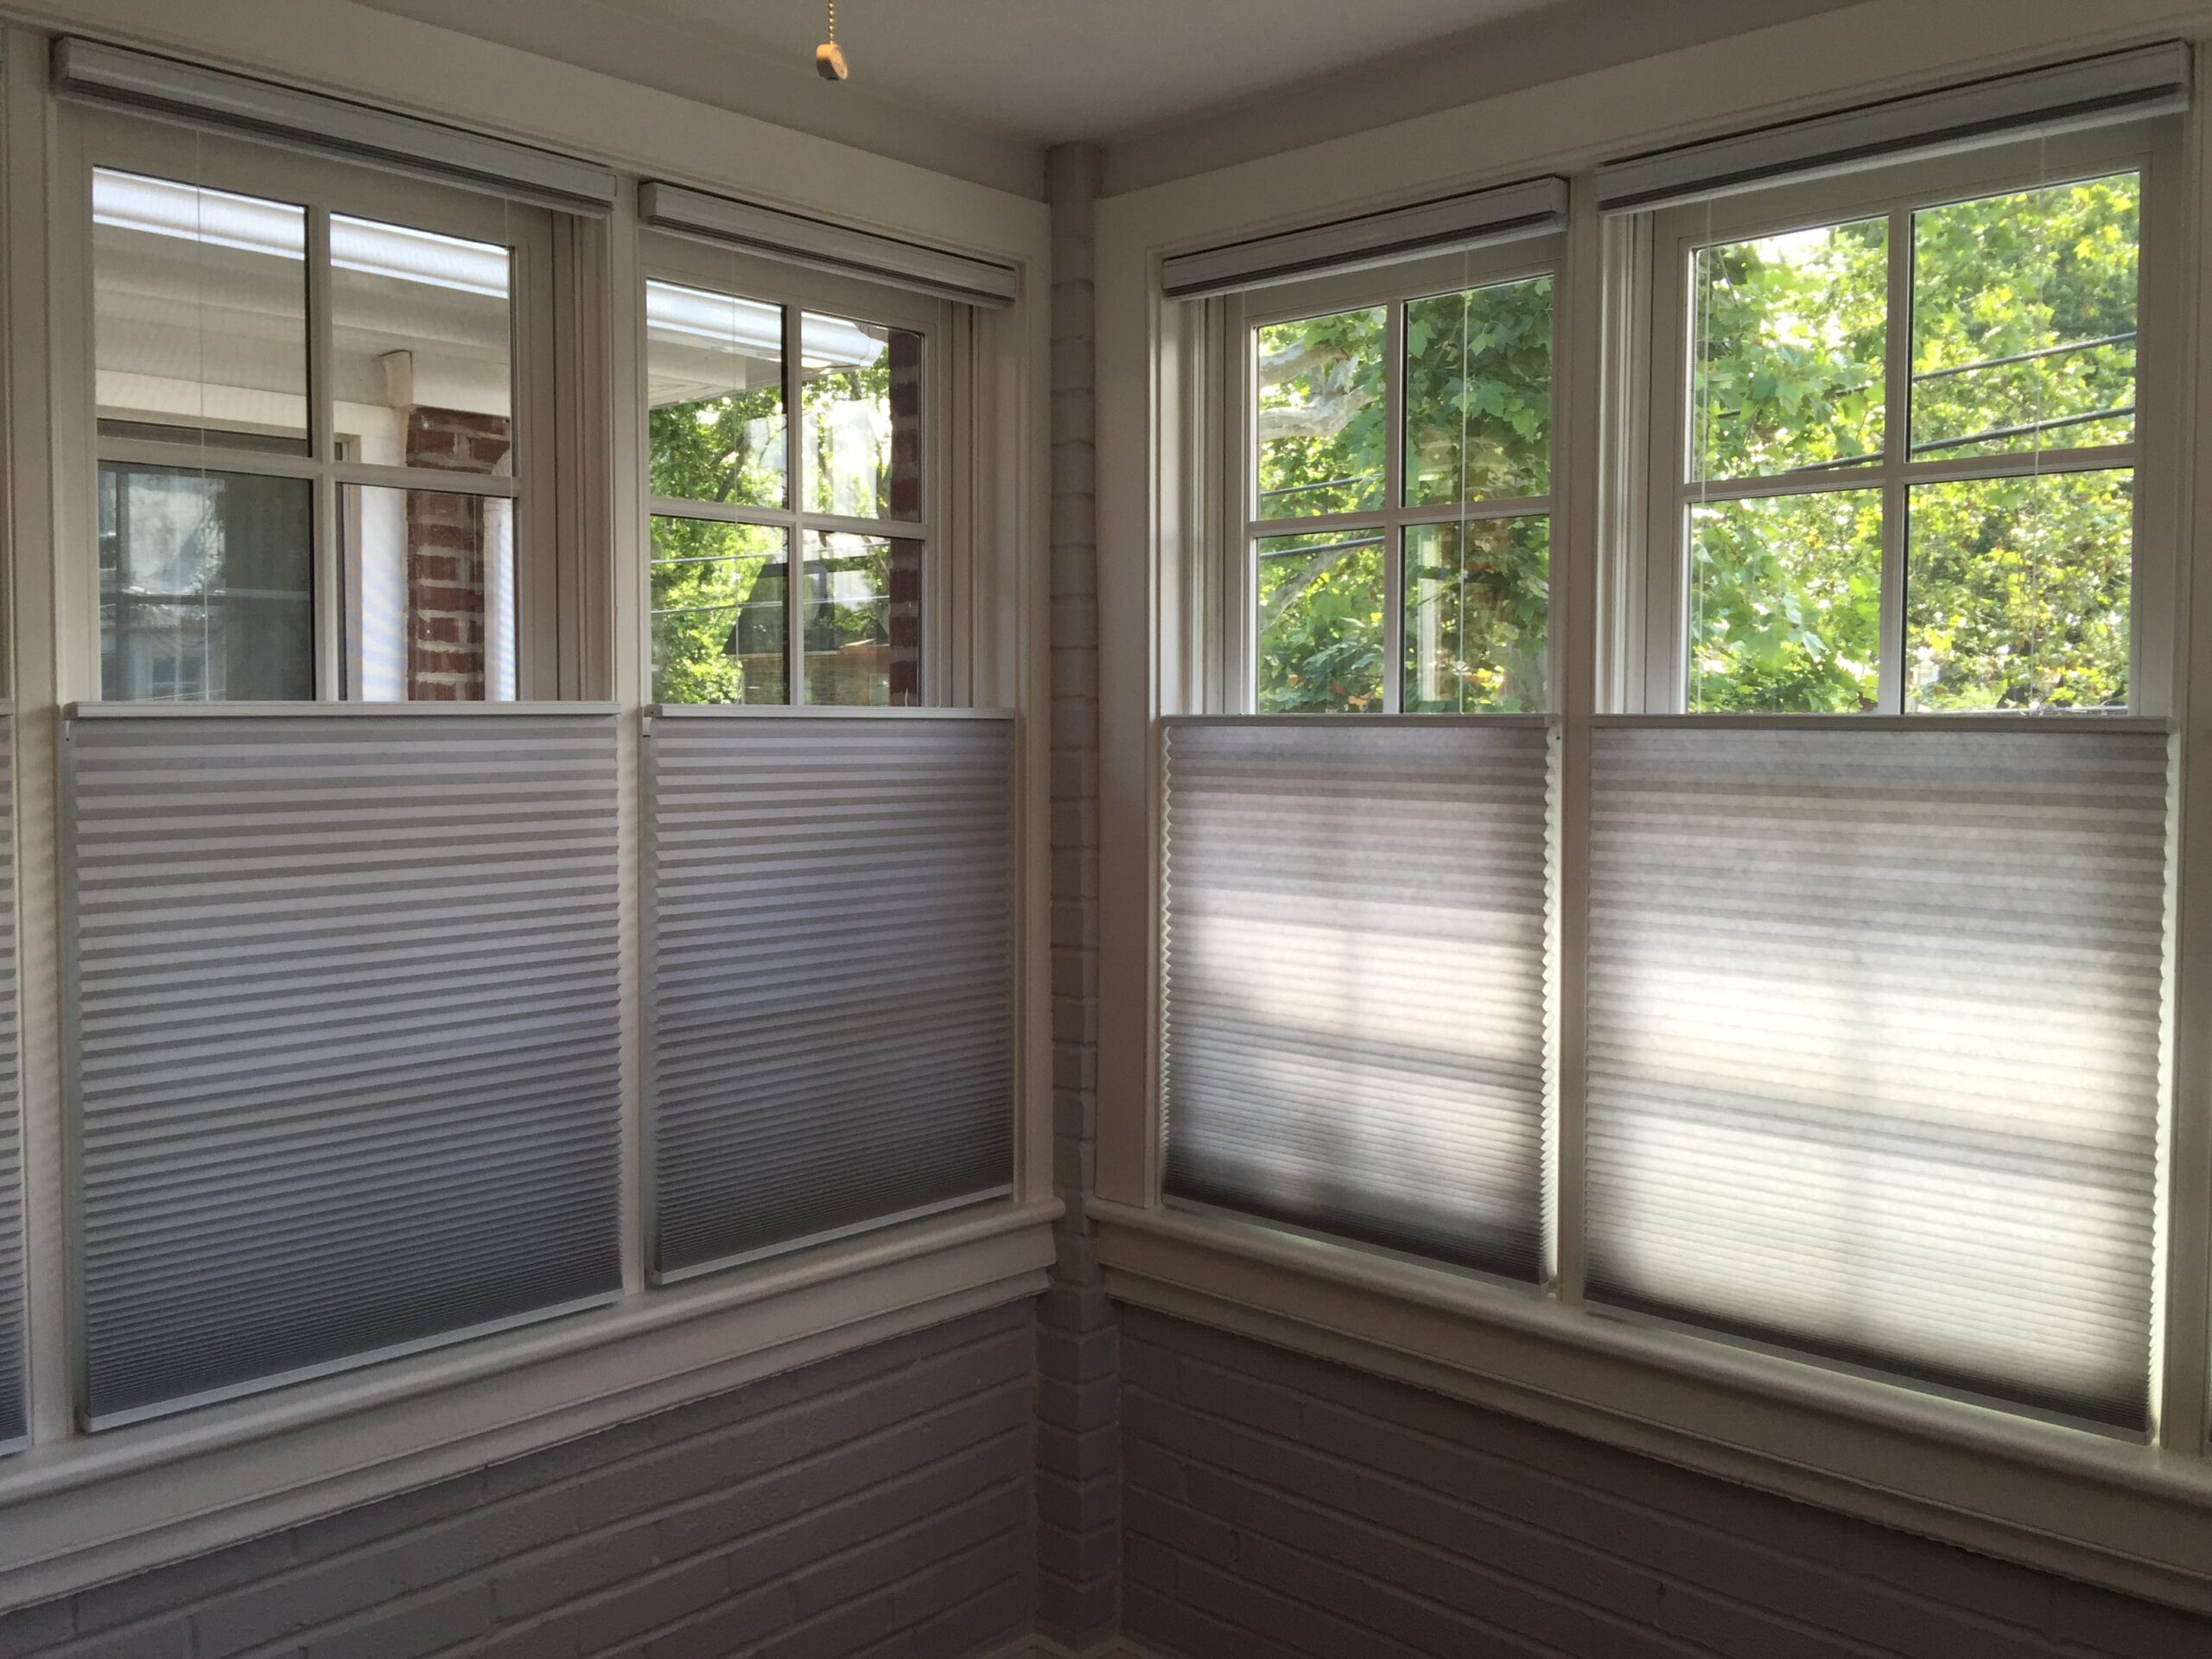 Do Blackout Blinds Keep The Heat Out?